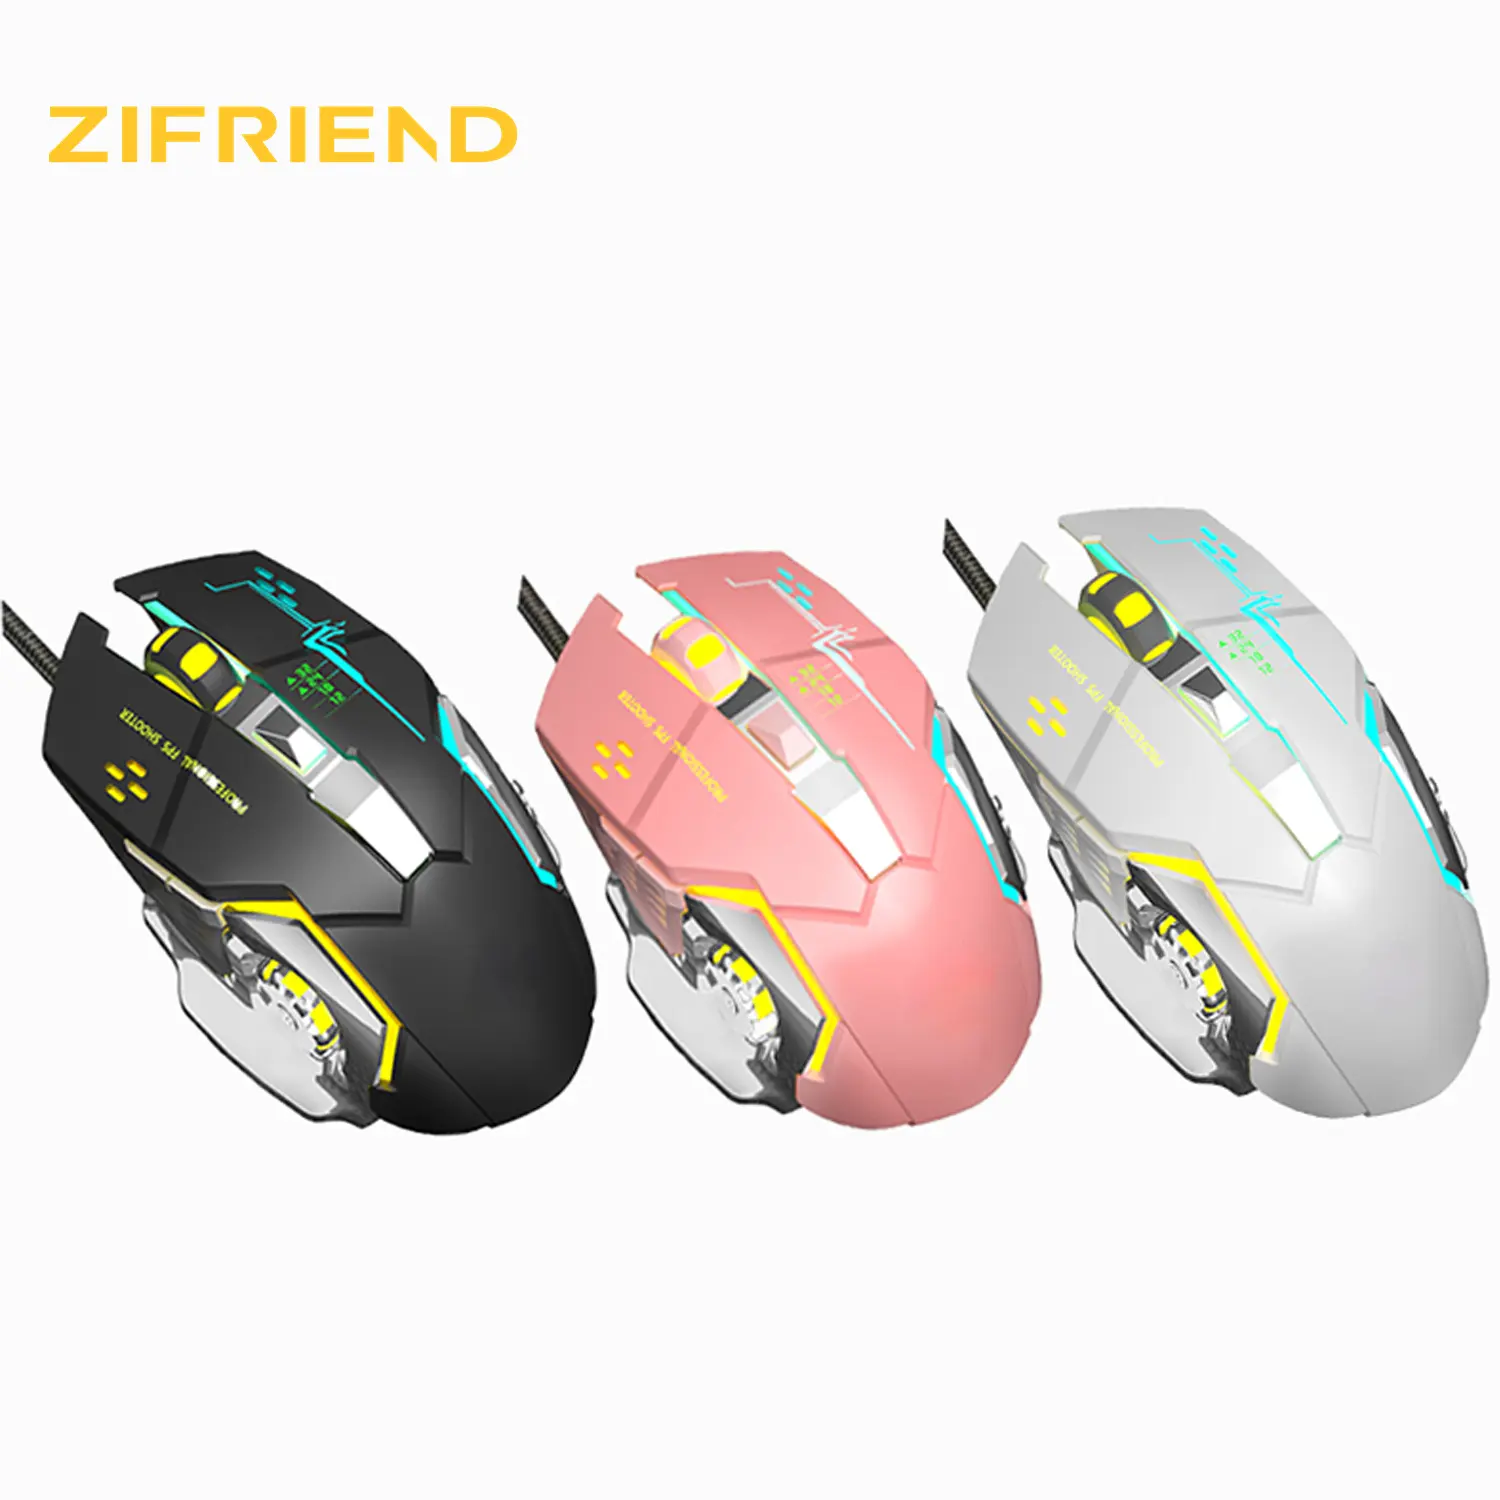 ZF USB Wired Gaming Mouse Adjustable 6 Buttons LED Backlit Gamer Mice for Desktop PC Computer Laptop Accessories Mouse